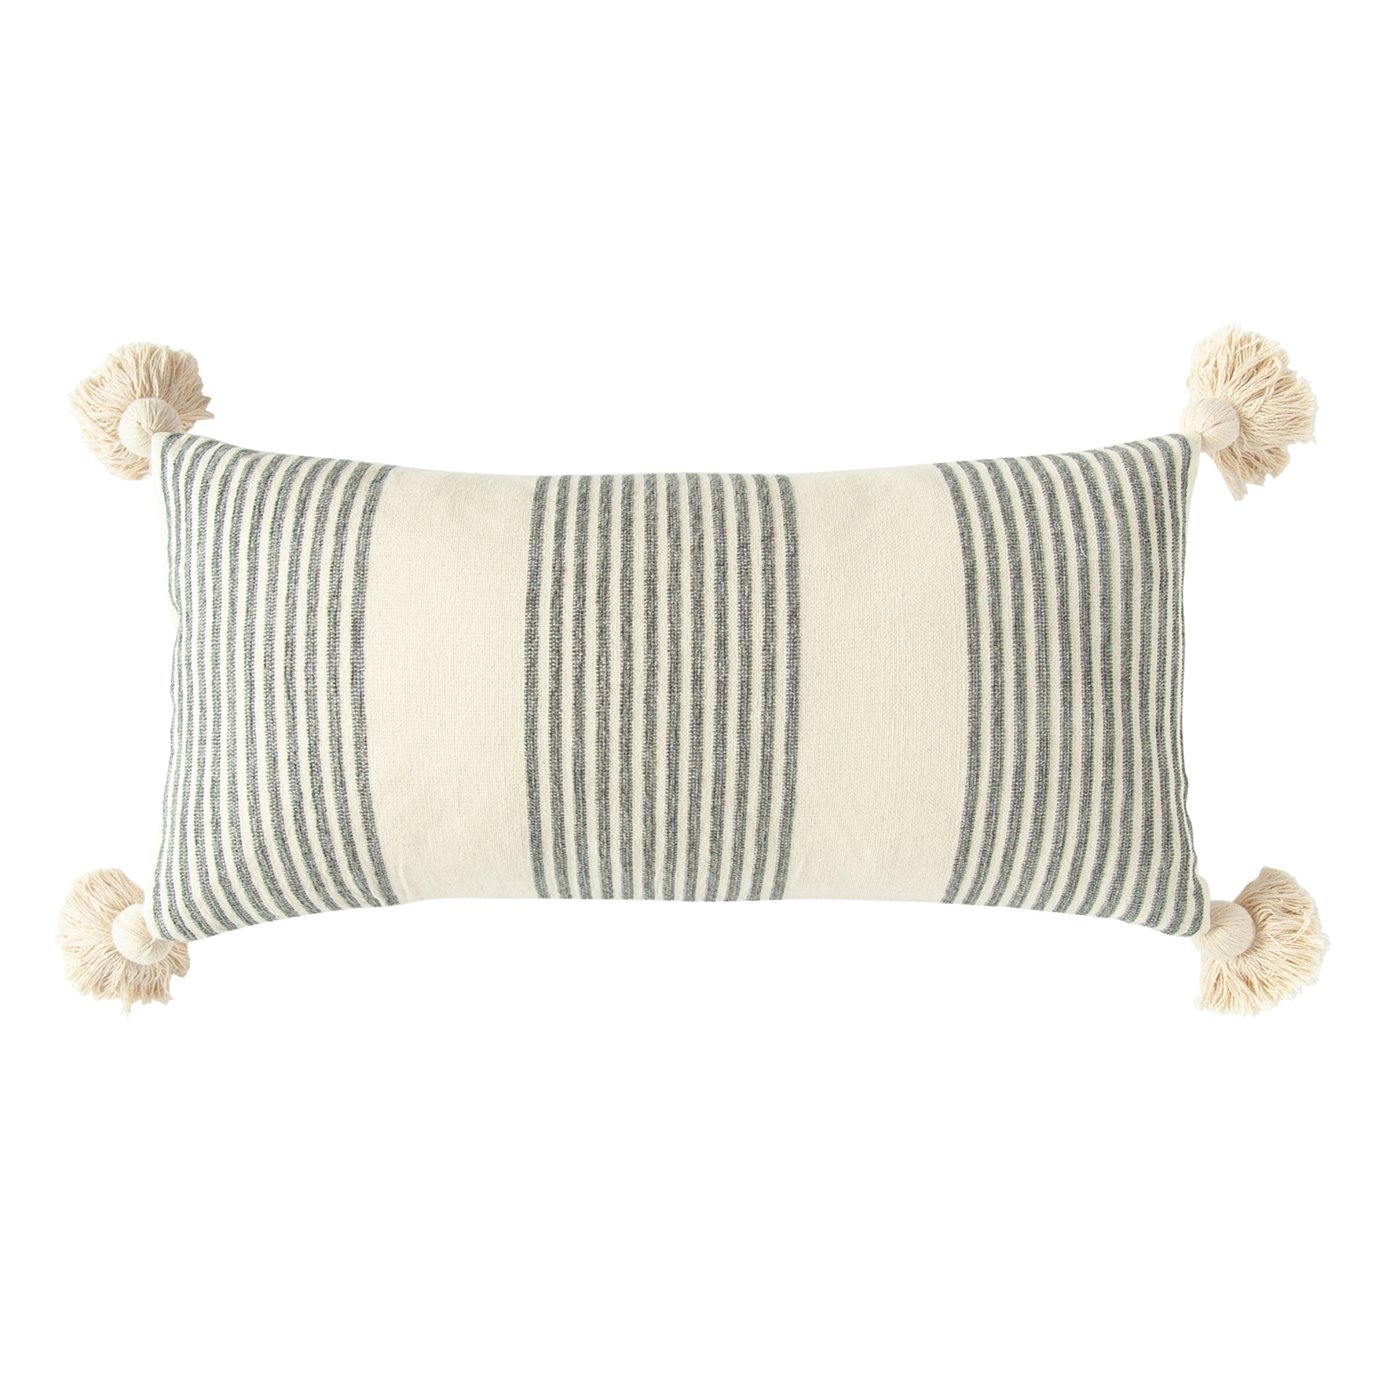 Cream Cotton & Chenille Pillow with Vertical Grey Stripes, Tassels & Solid Cream Back